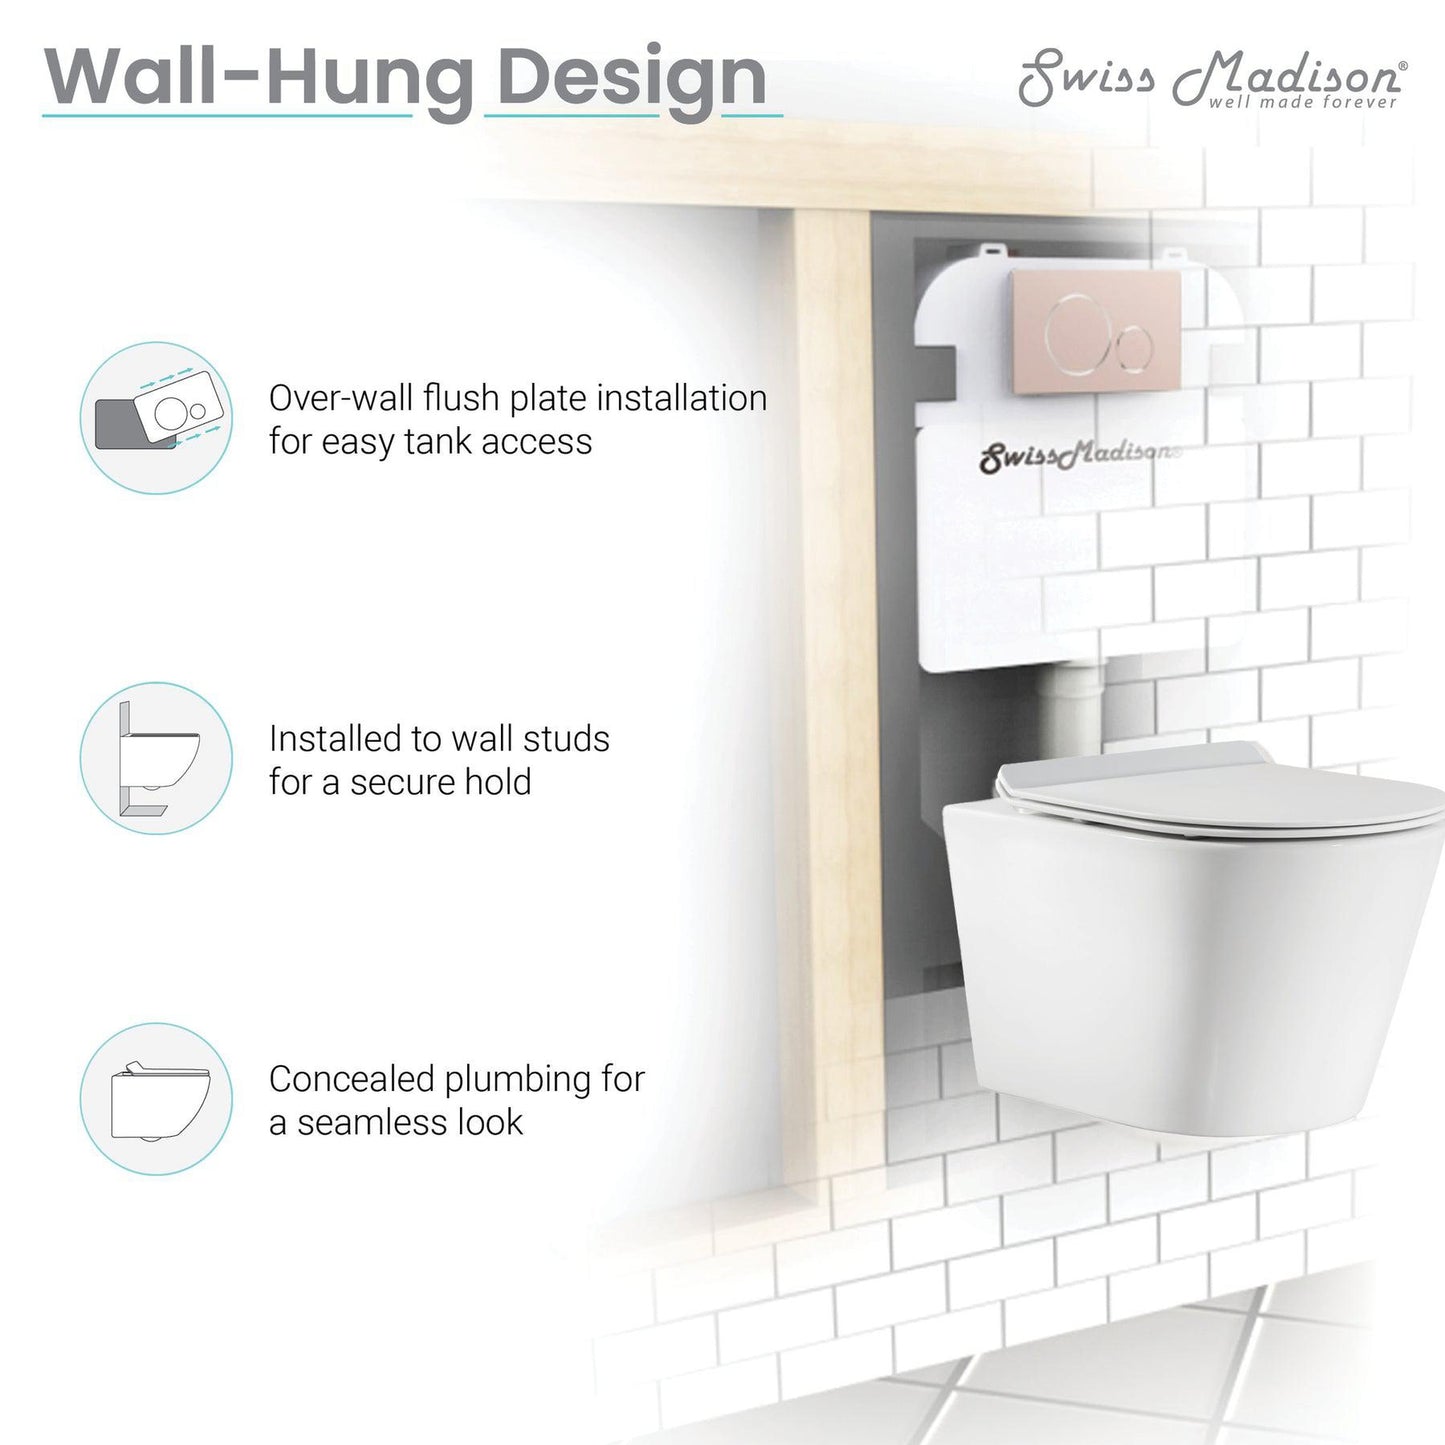 Swiss Madison Calice 14" x 13" Glossy White Round Wall-Hung Toilet Bundle With In-Wall Carrier Tank and 0.8/1.6 GPF Dual-Flush Large Wall Actuator Plate